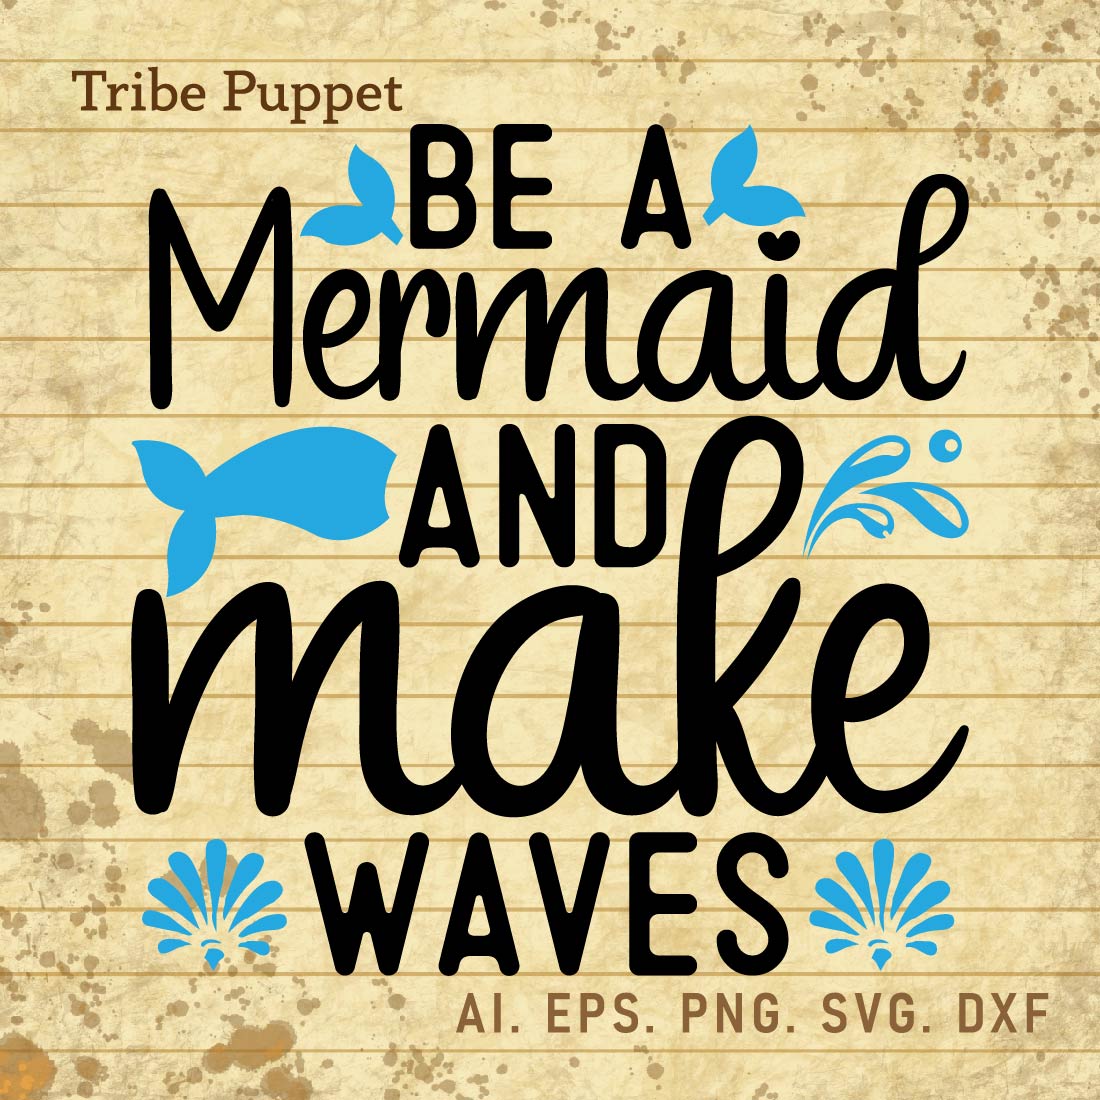 Mermaid Quotes cover image.